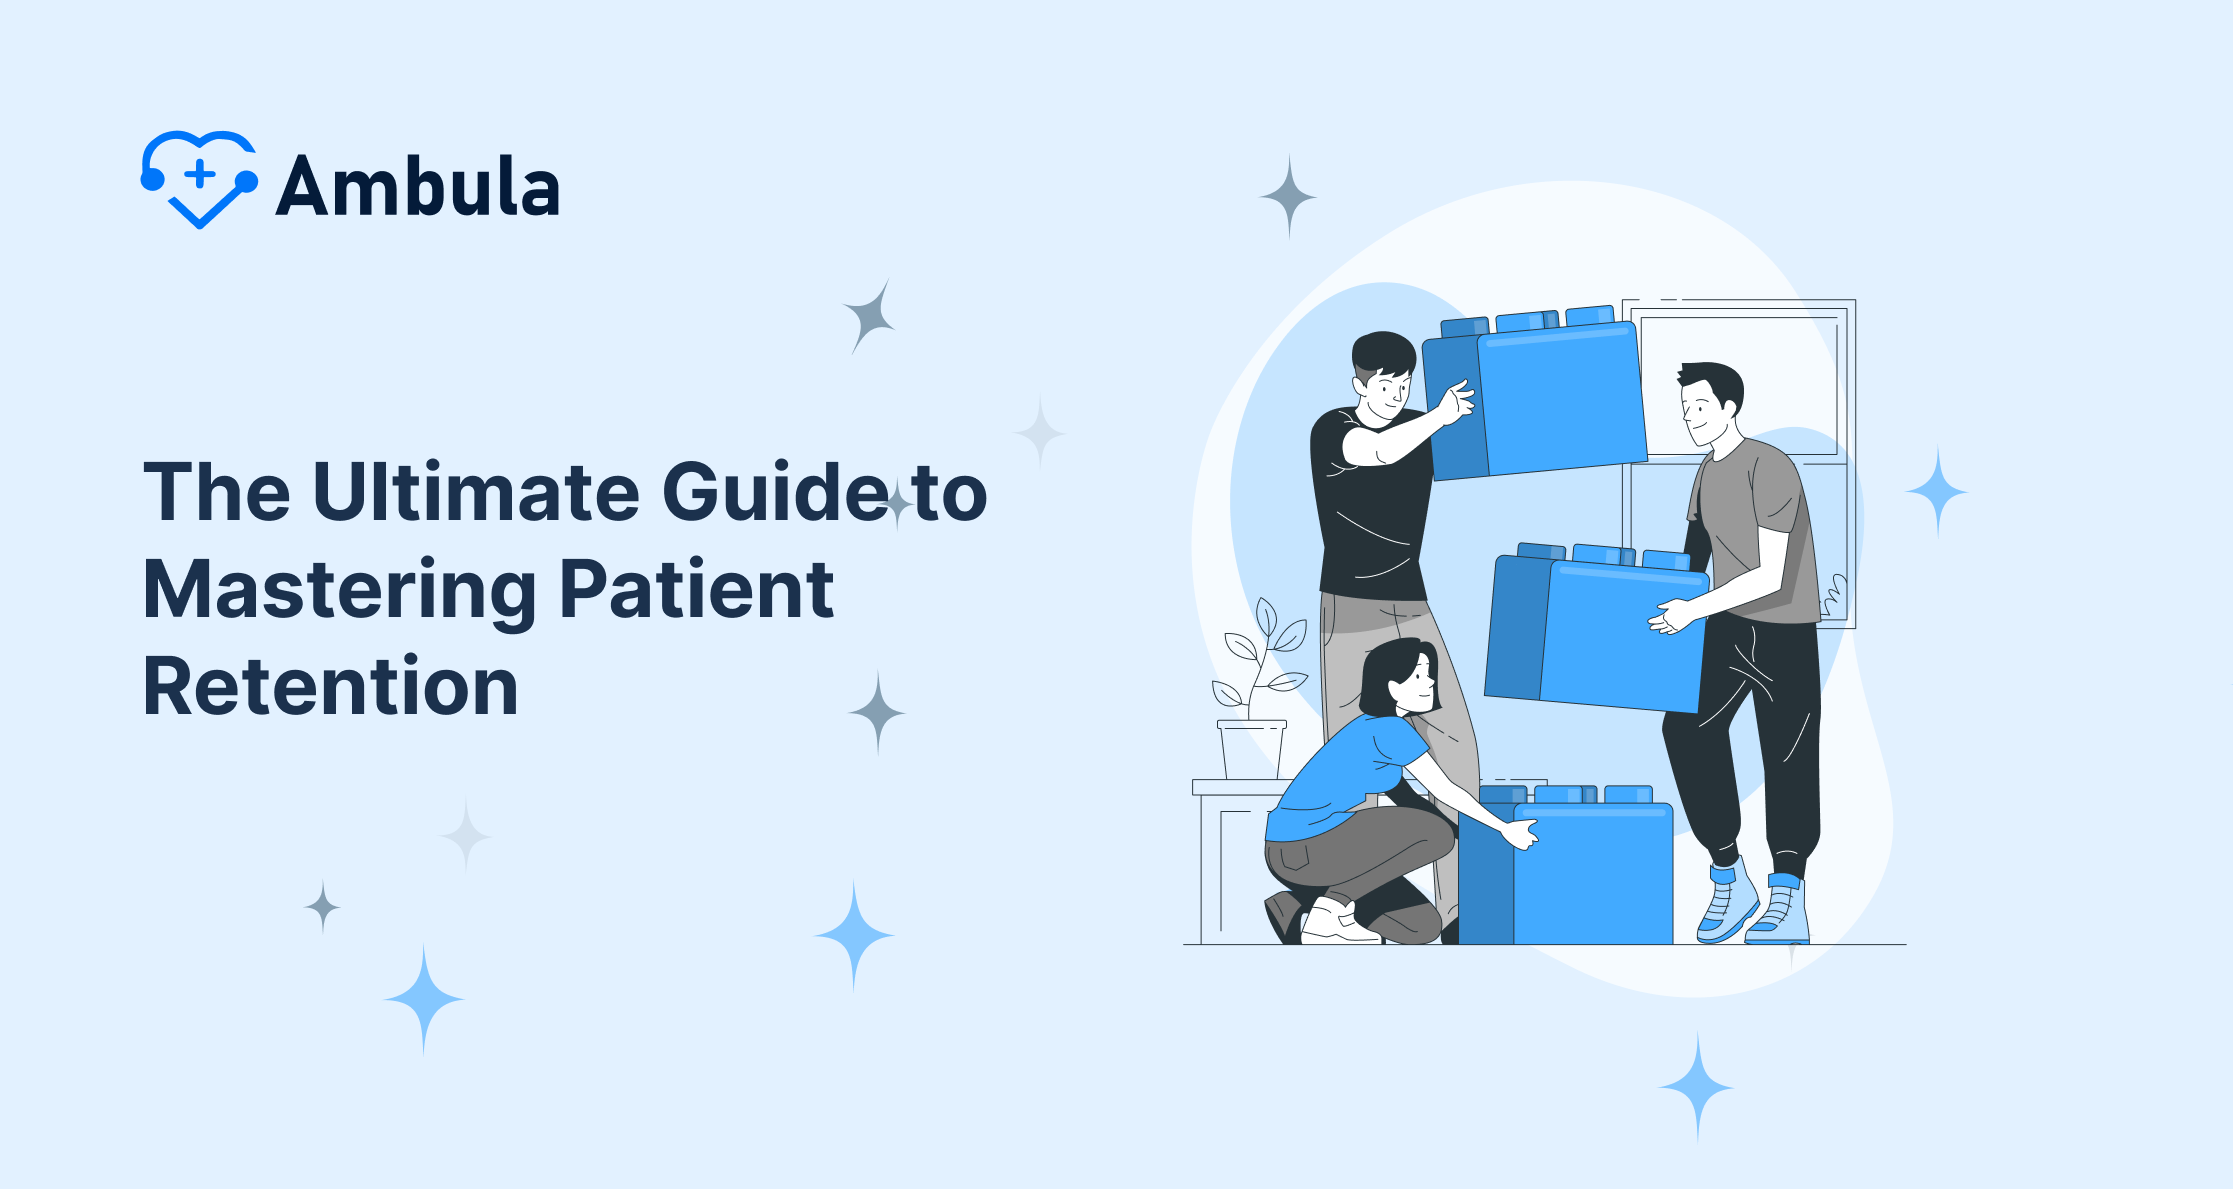 The Ultimate Guide to Mastering Patient Retention